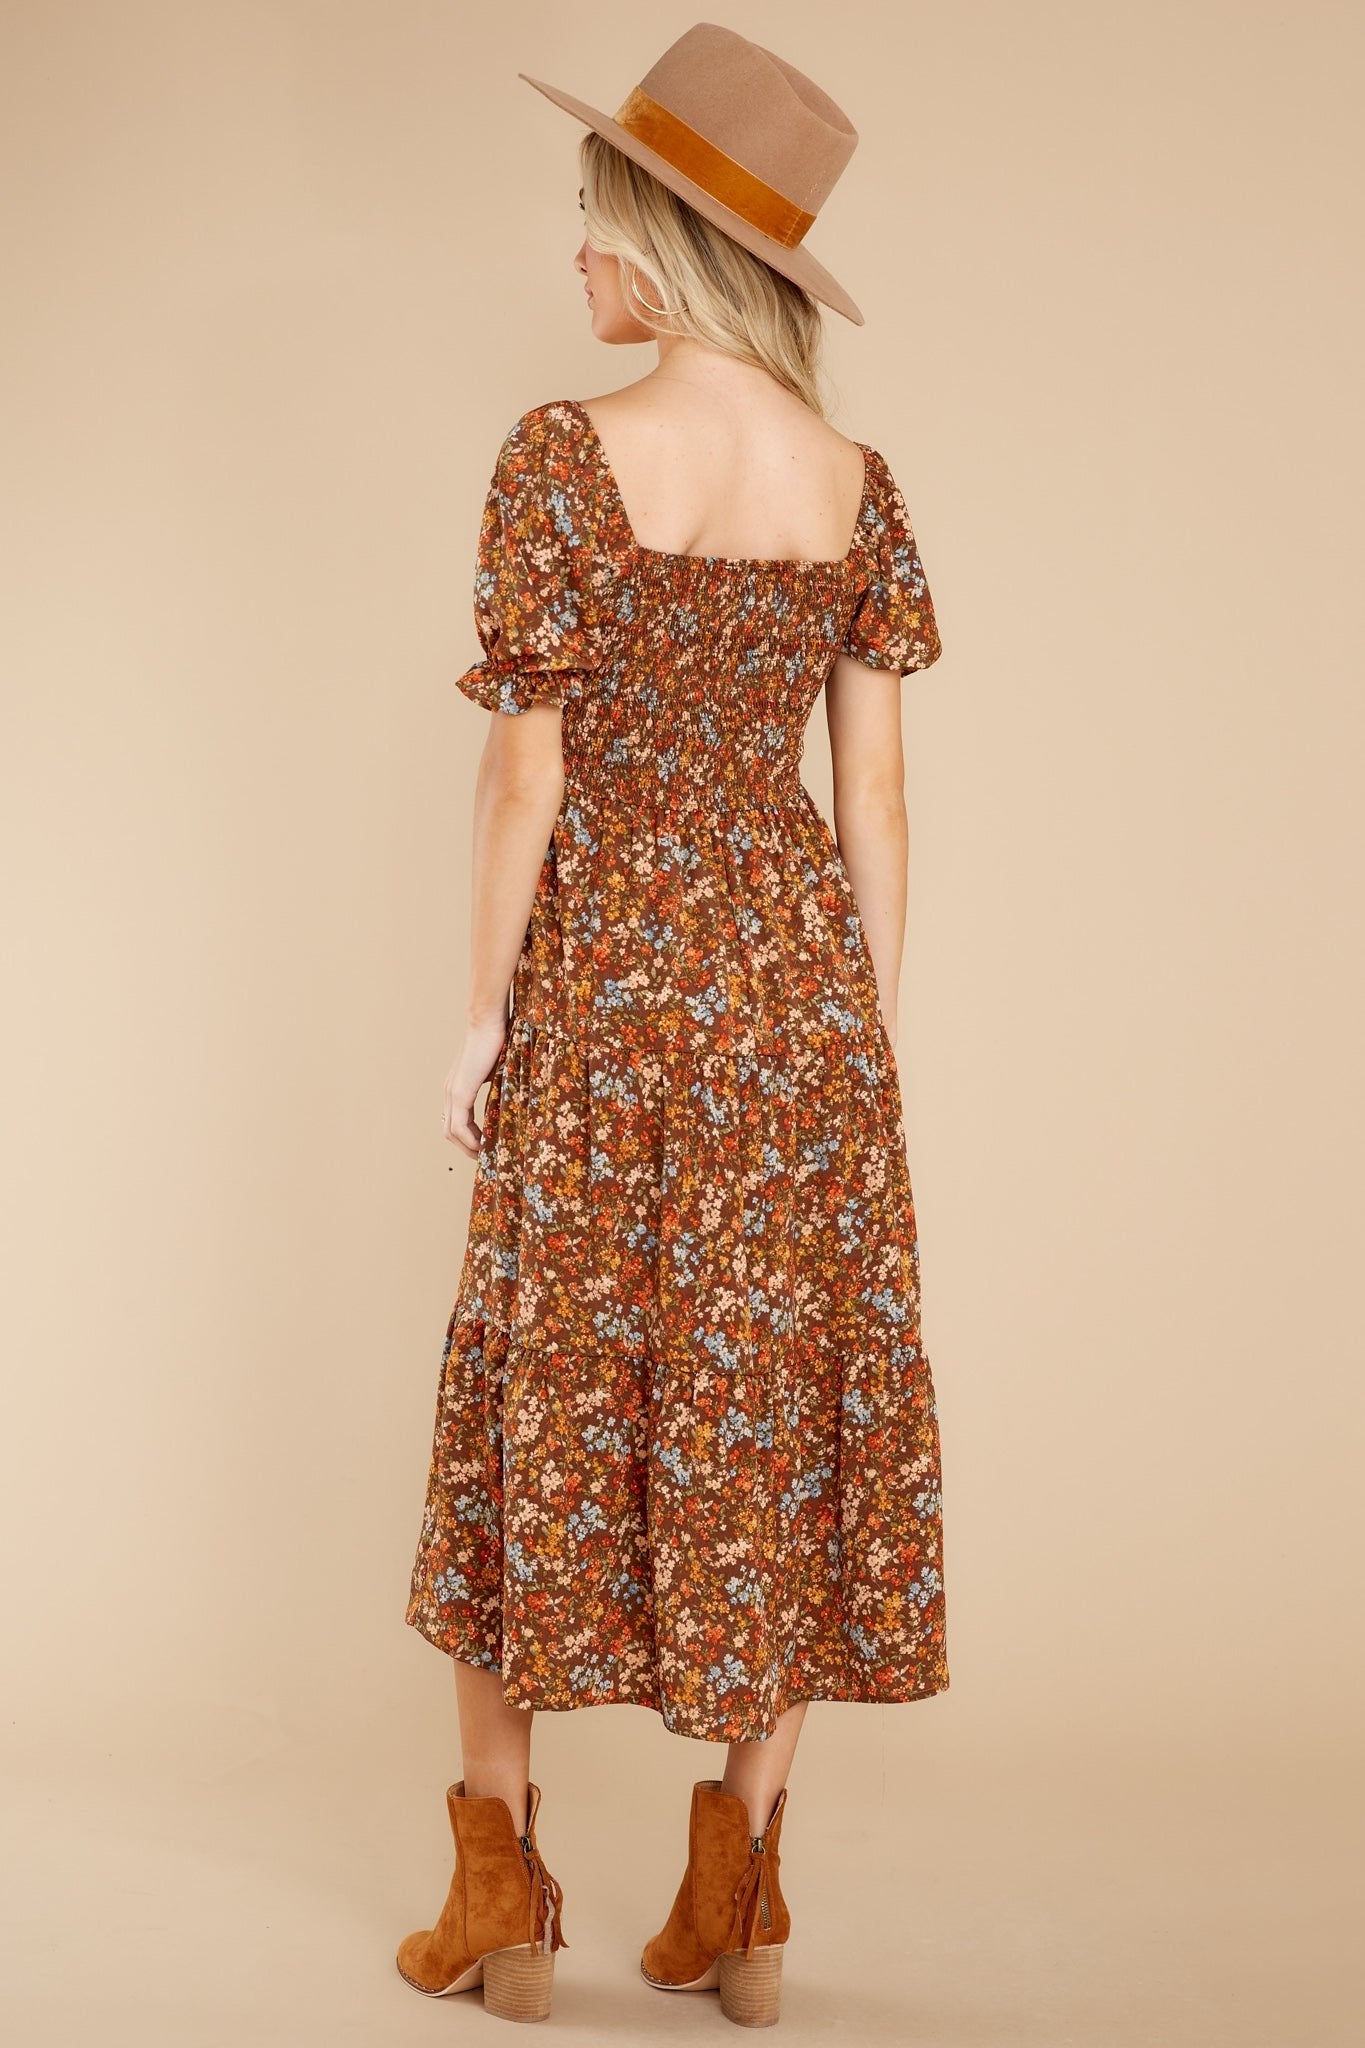 Easy To Love Brown Floral Midi Dress - Red Dress